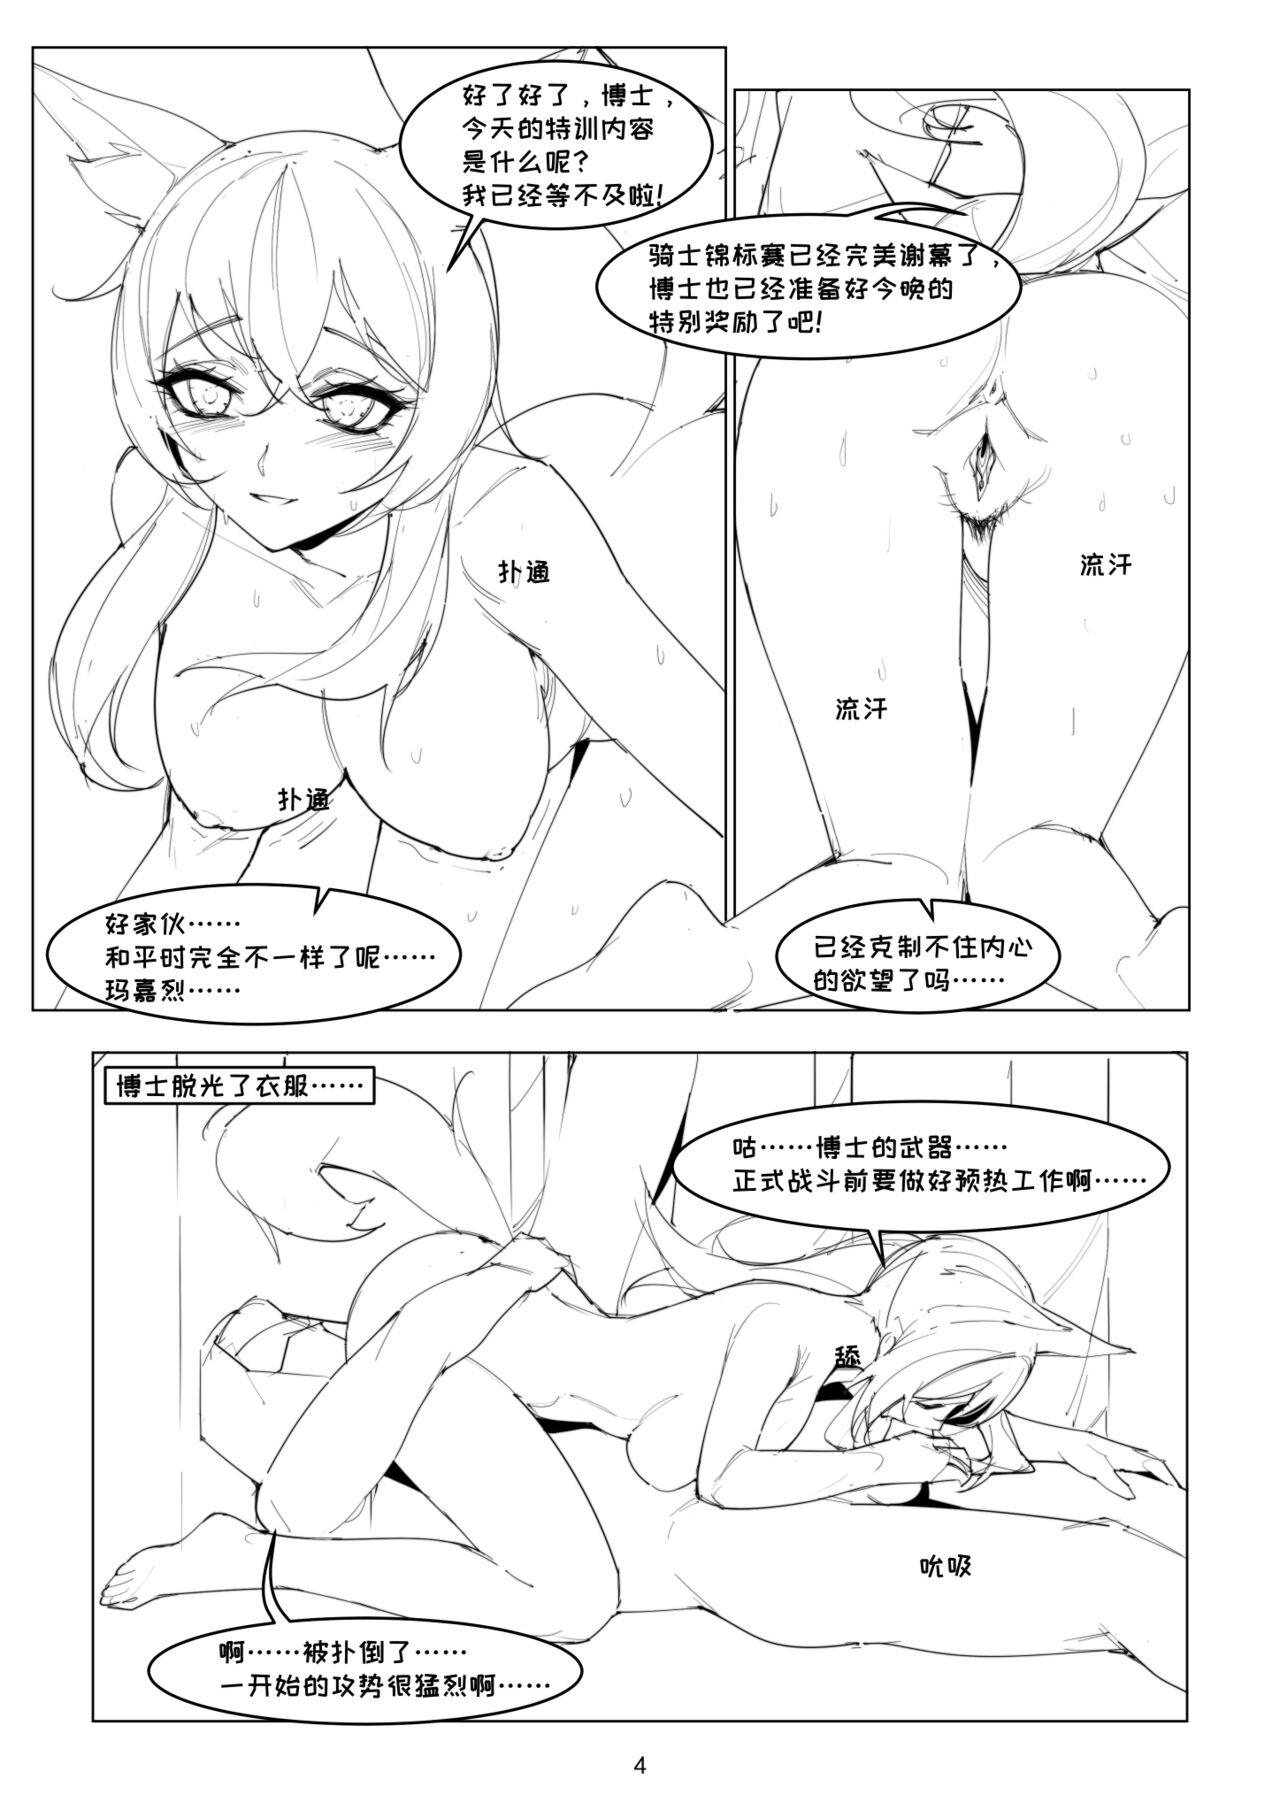 Novinha 【Tomorrow Ark】my love horse - Arknights 3some - Page 3